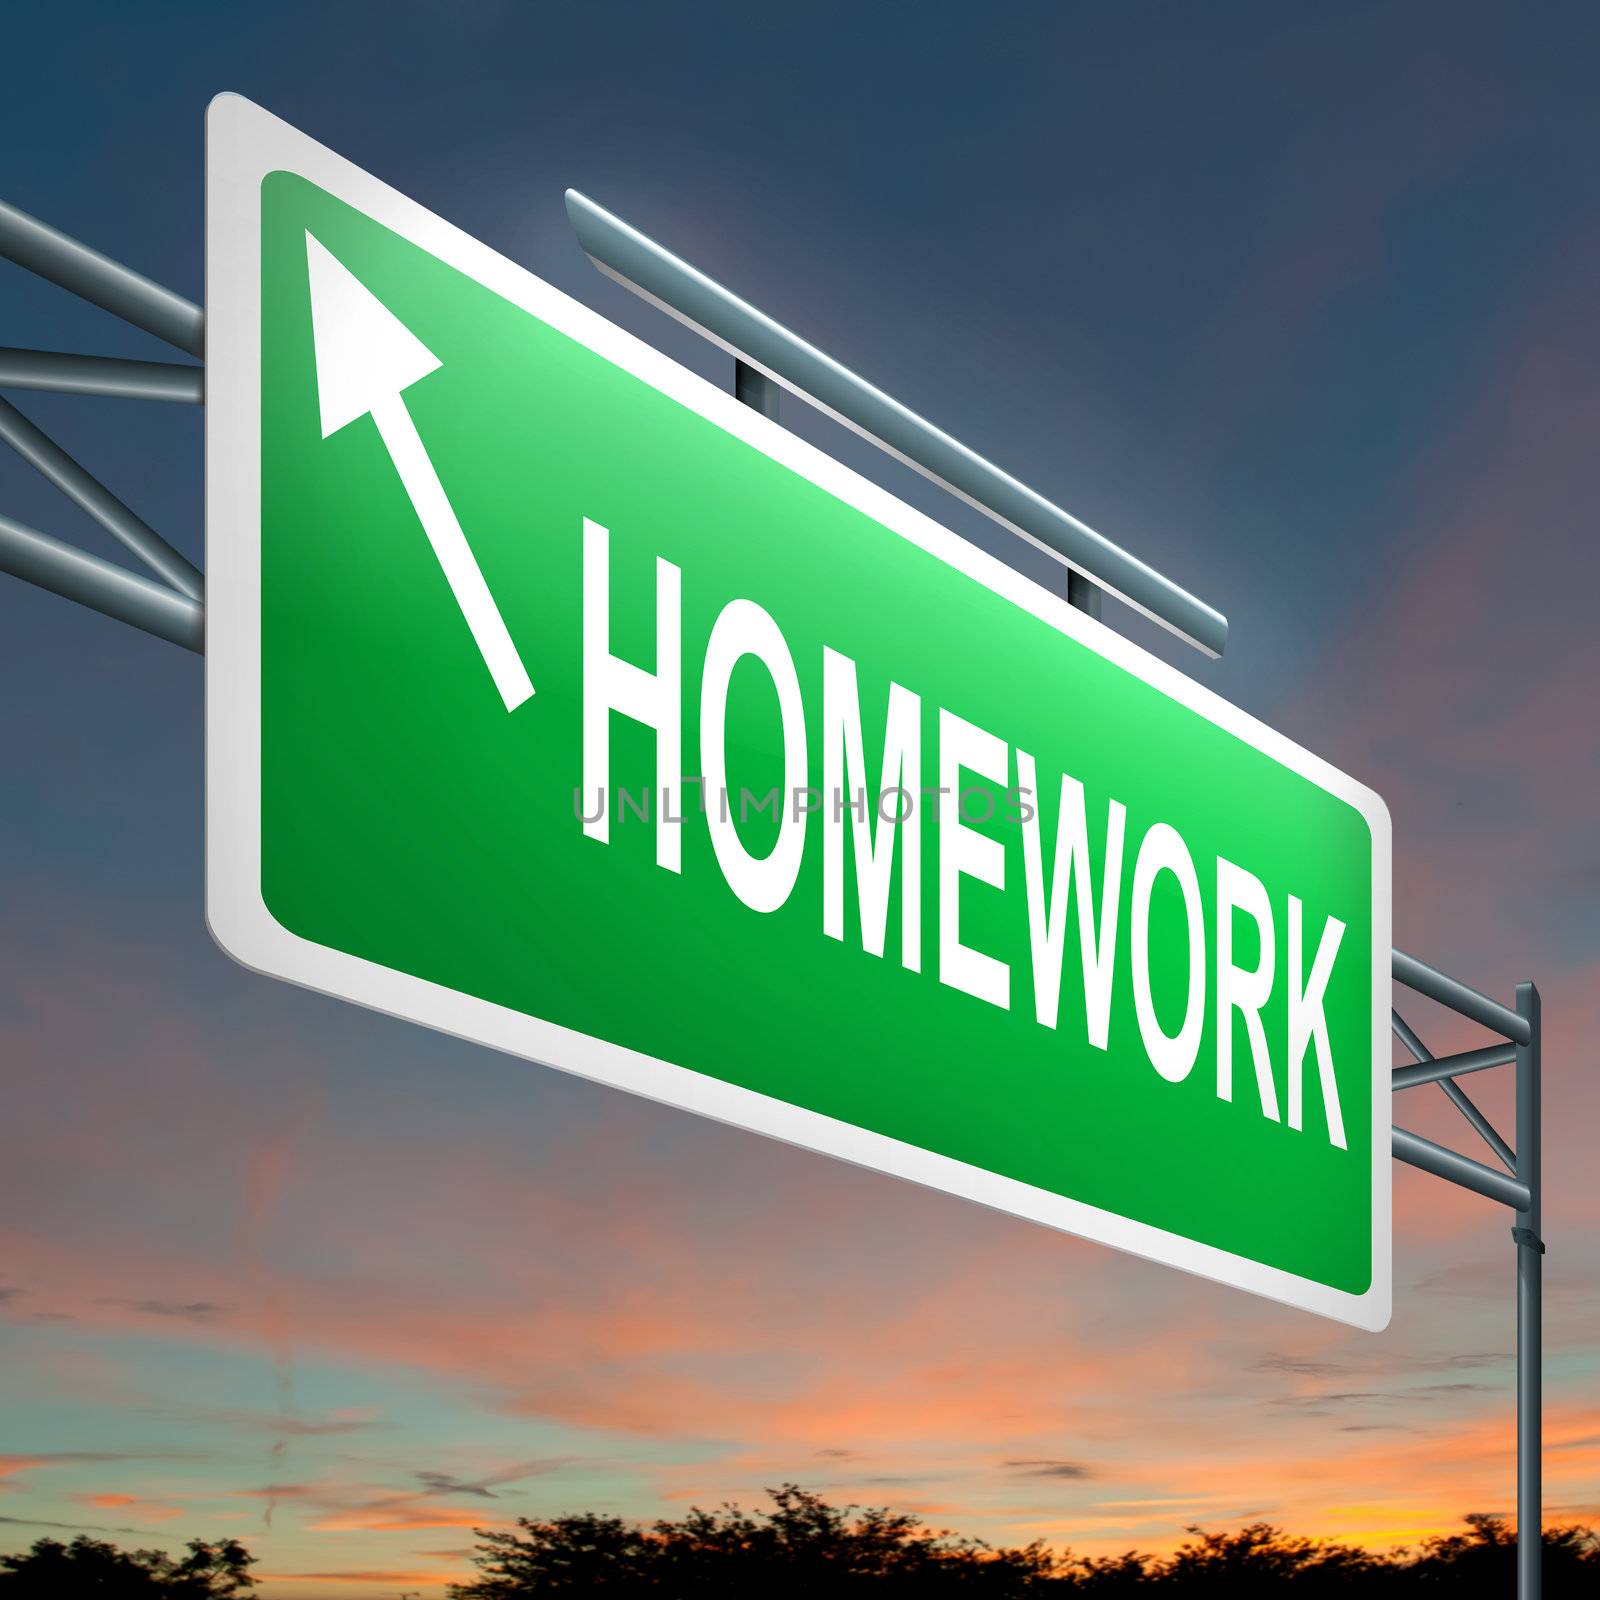 Illustration depicting a roadsign with a homework concept. Sunset background.